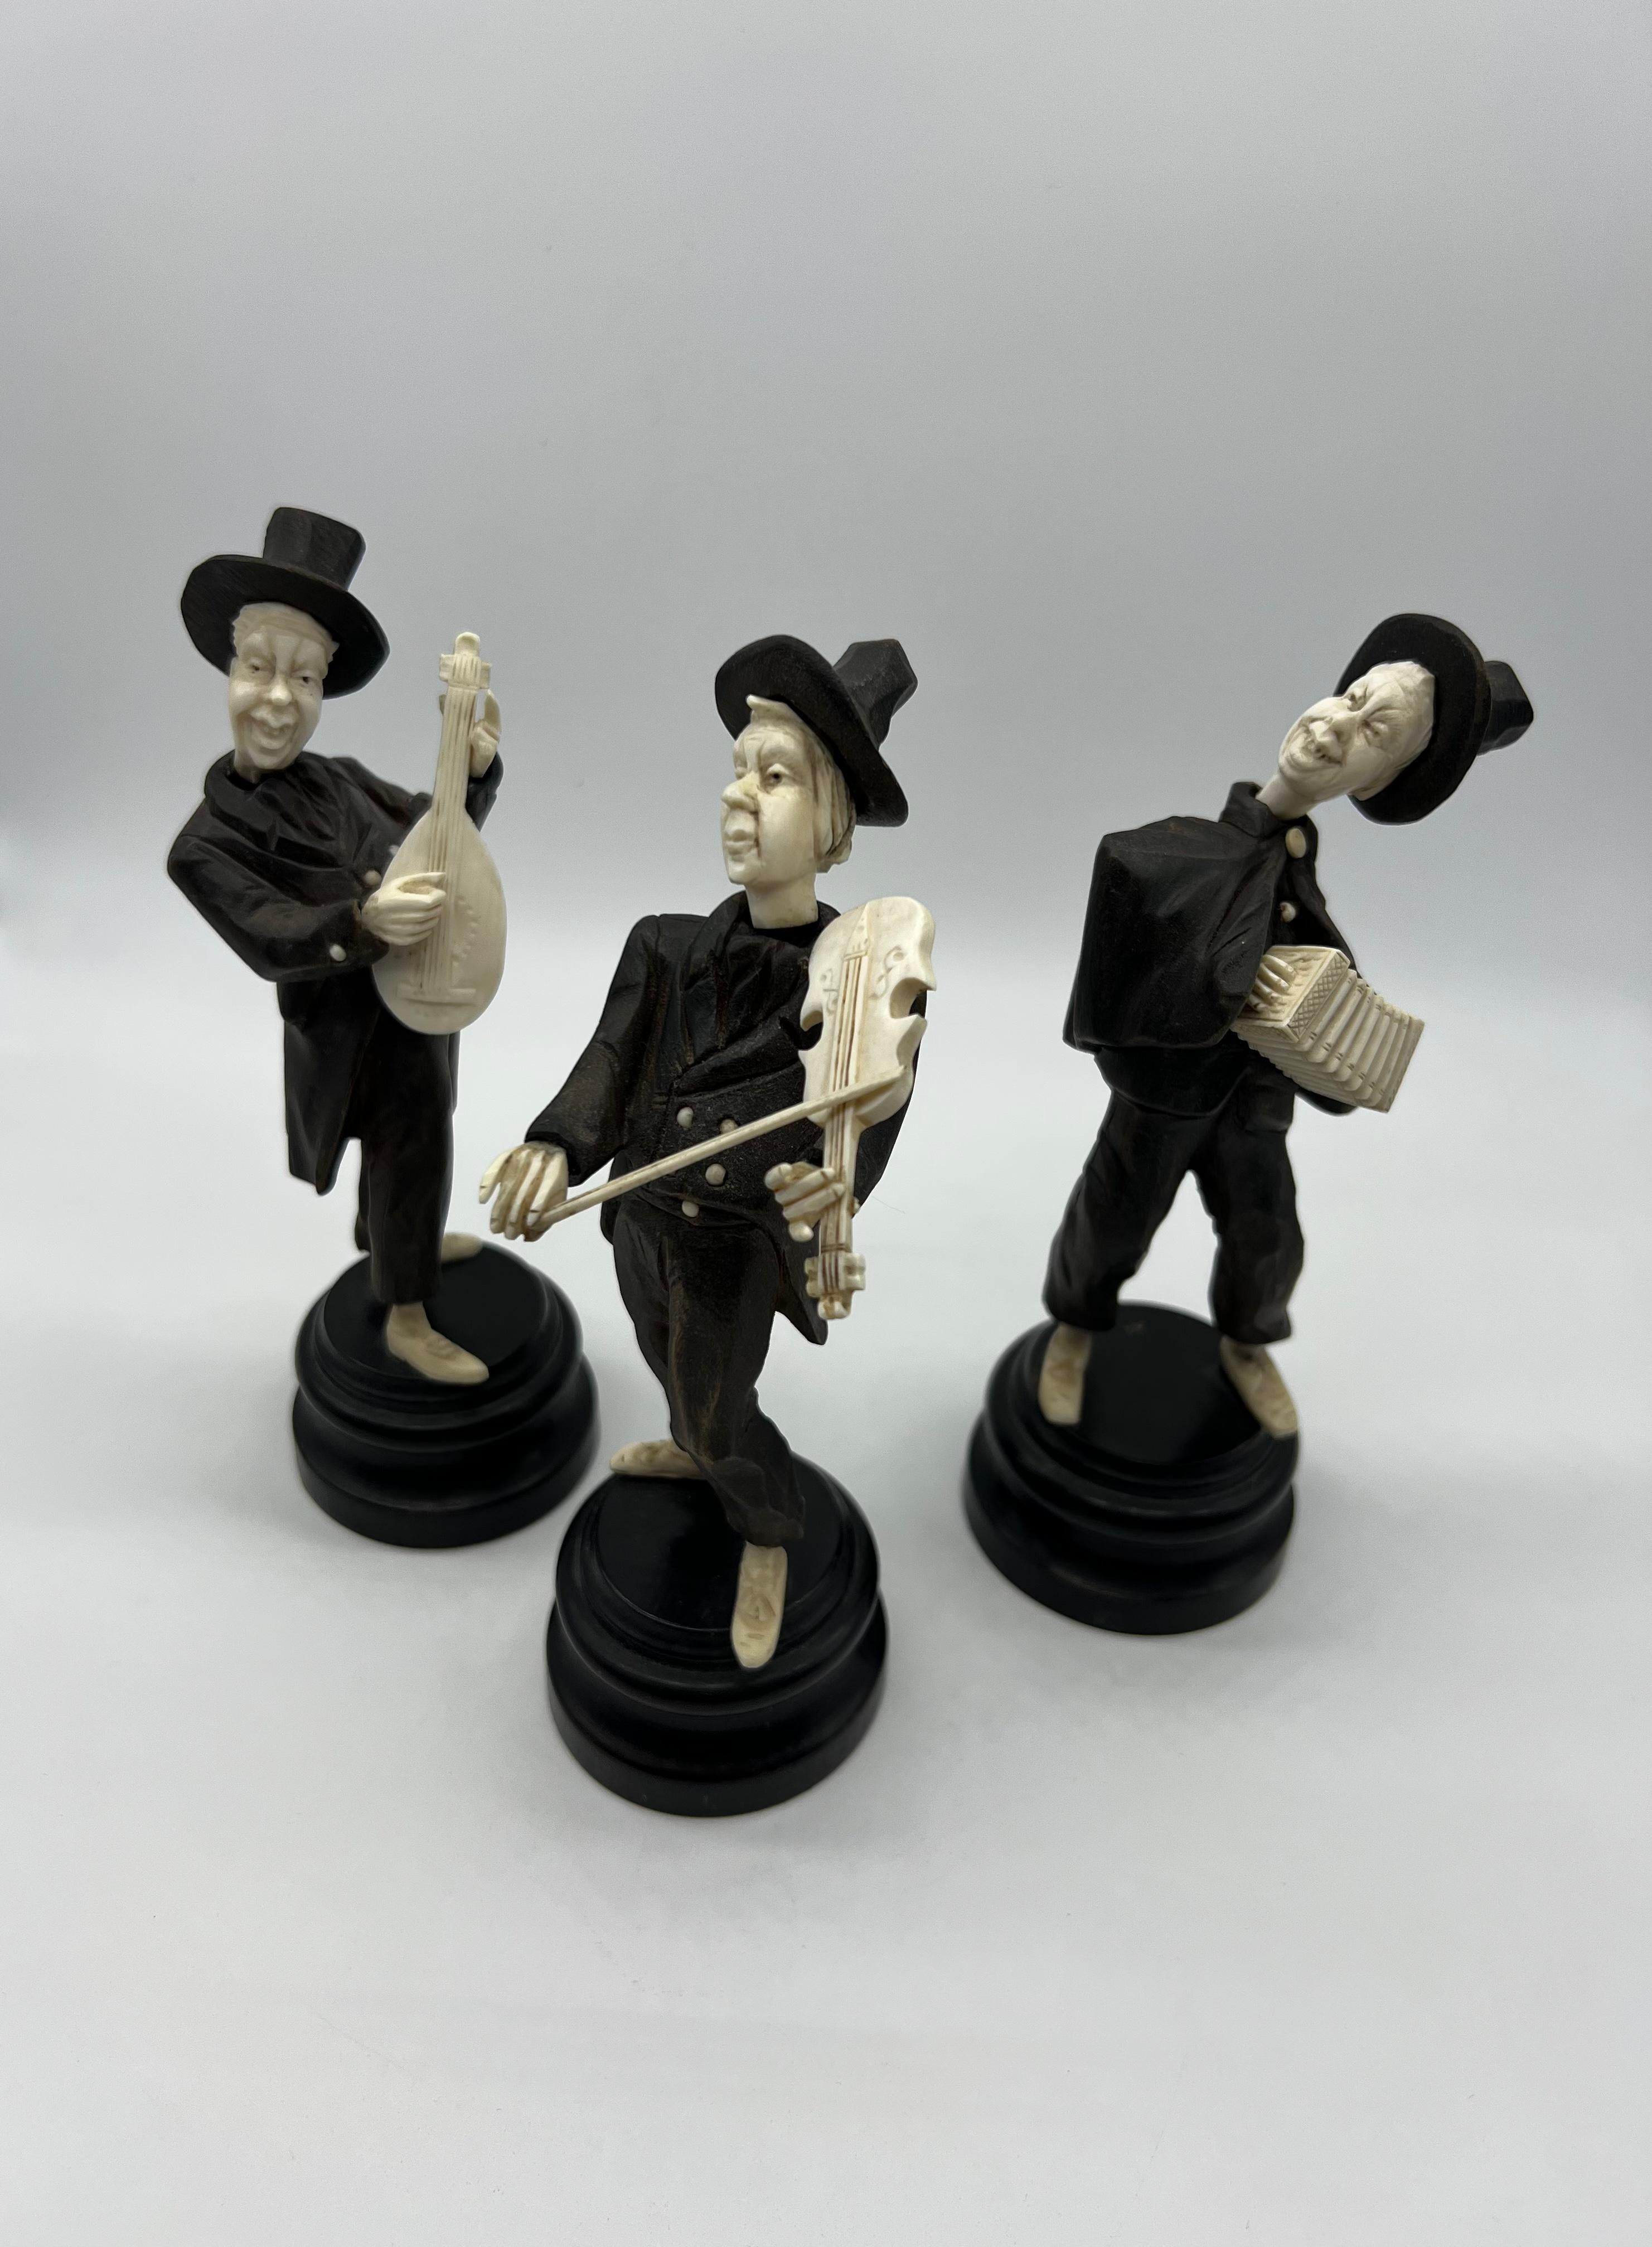 Carved figures of wood and bone, on wooden base, height ca.17 cm. around 1900, three figures, good condition.